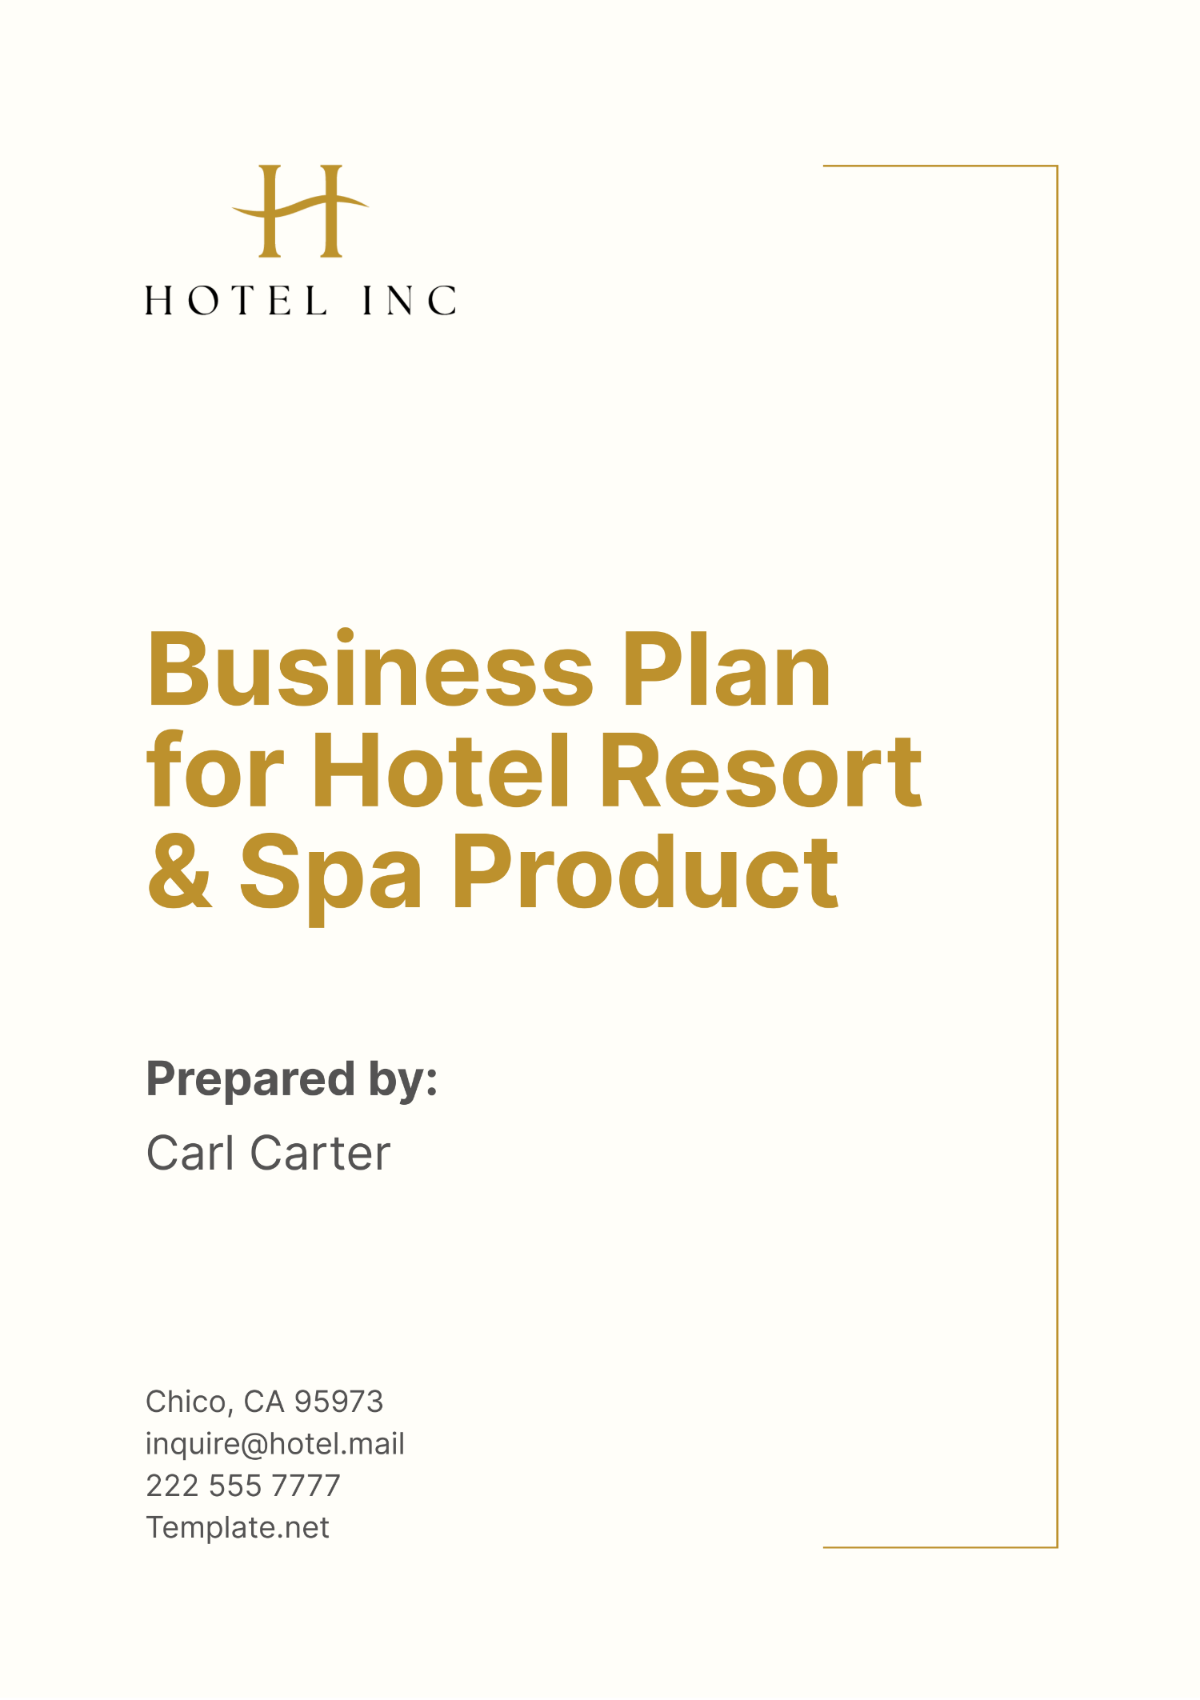 Free Business Plan for Hotel Resort & Spa Product Template